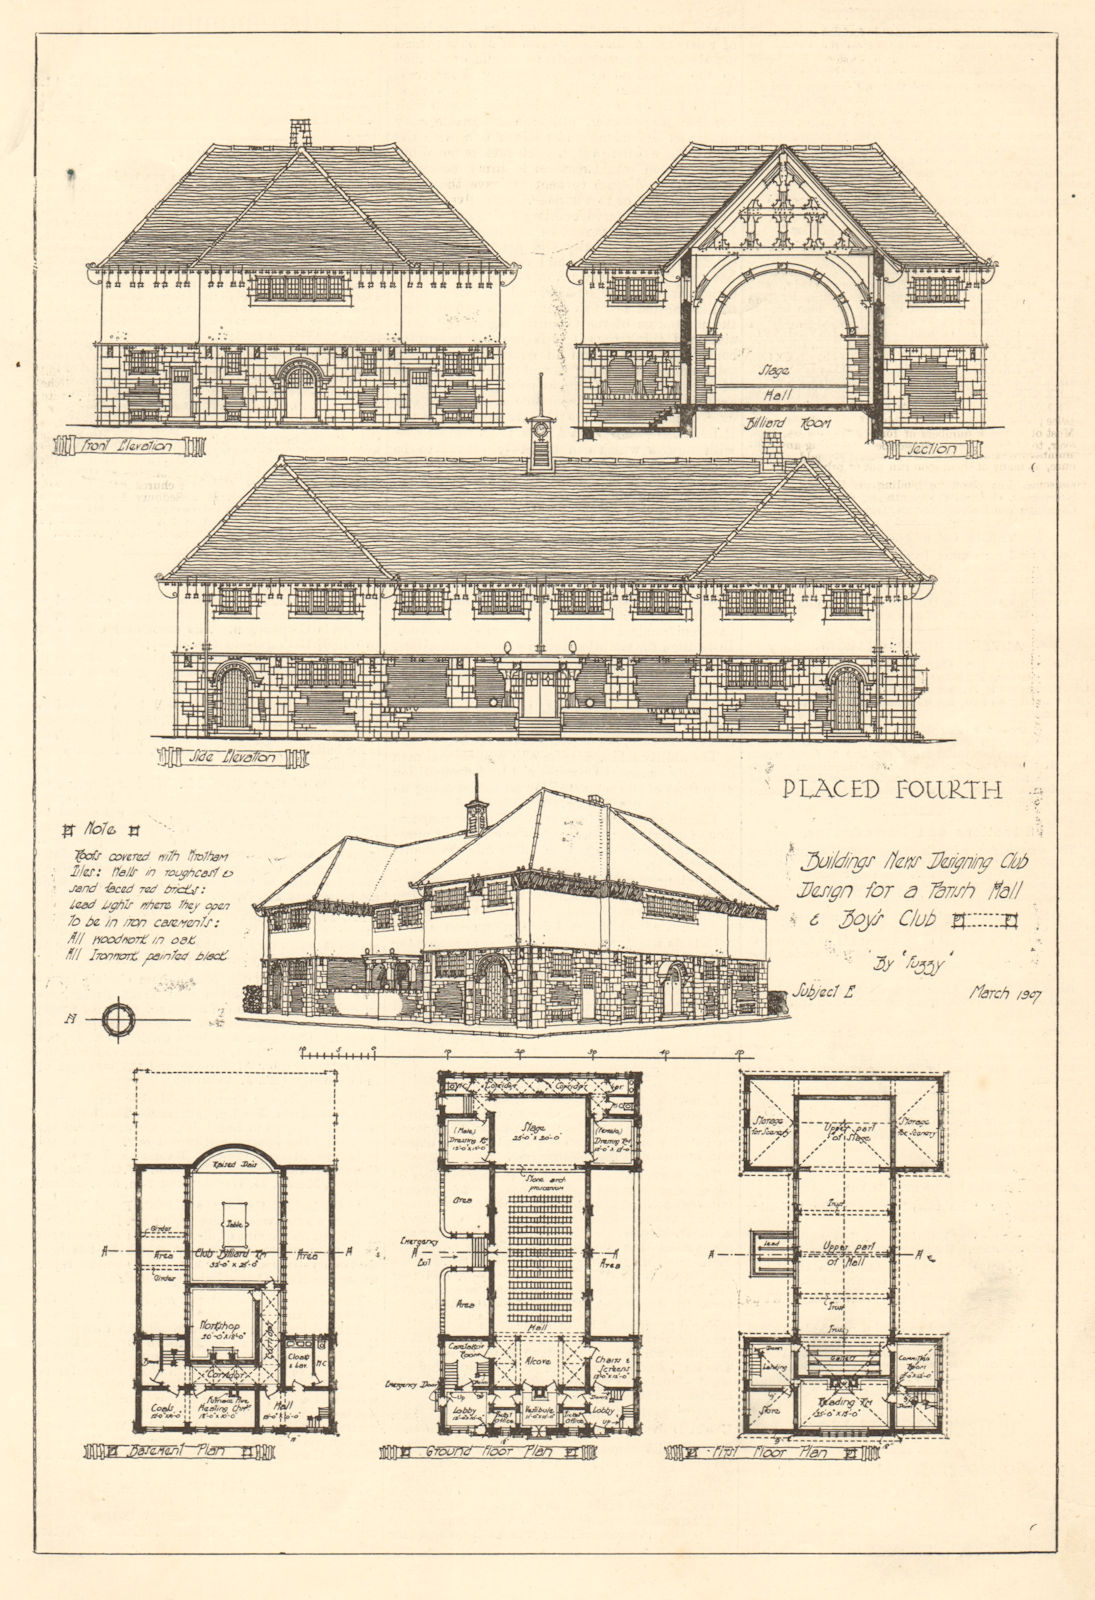 Associate Product Design for a Parish Hall & Boys club by Fuzzy, fourth. Elevations & plans 1907